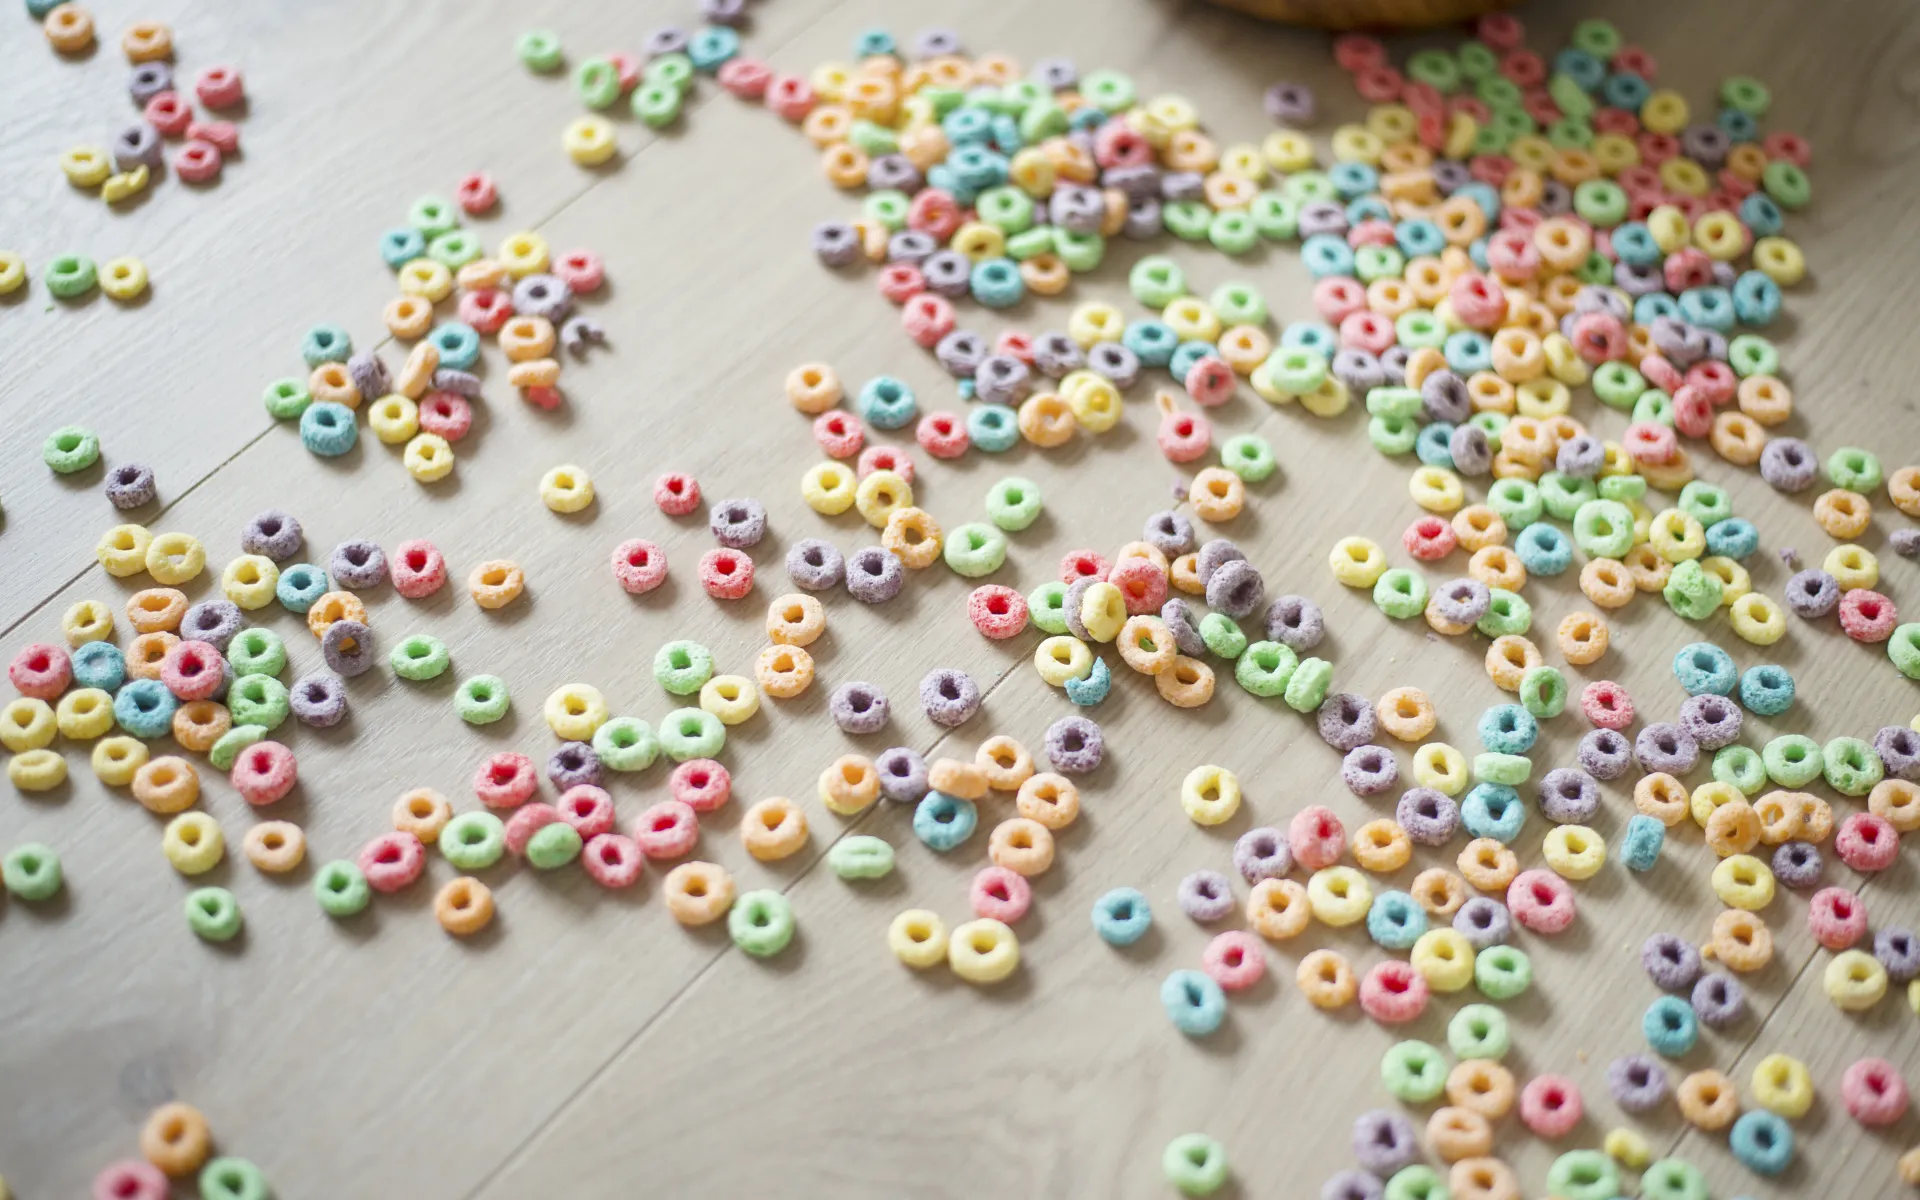 15 Myths Behind the 5 Second Rule